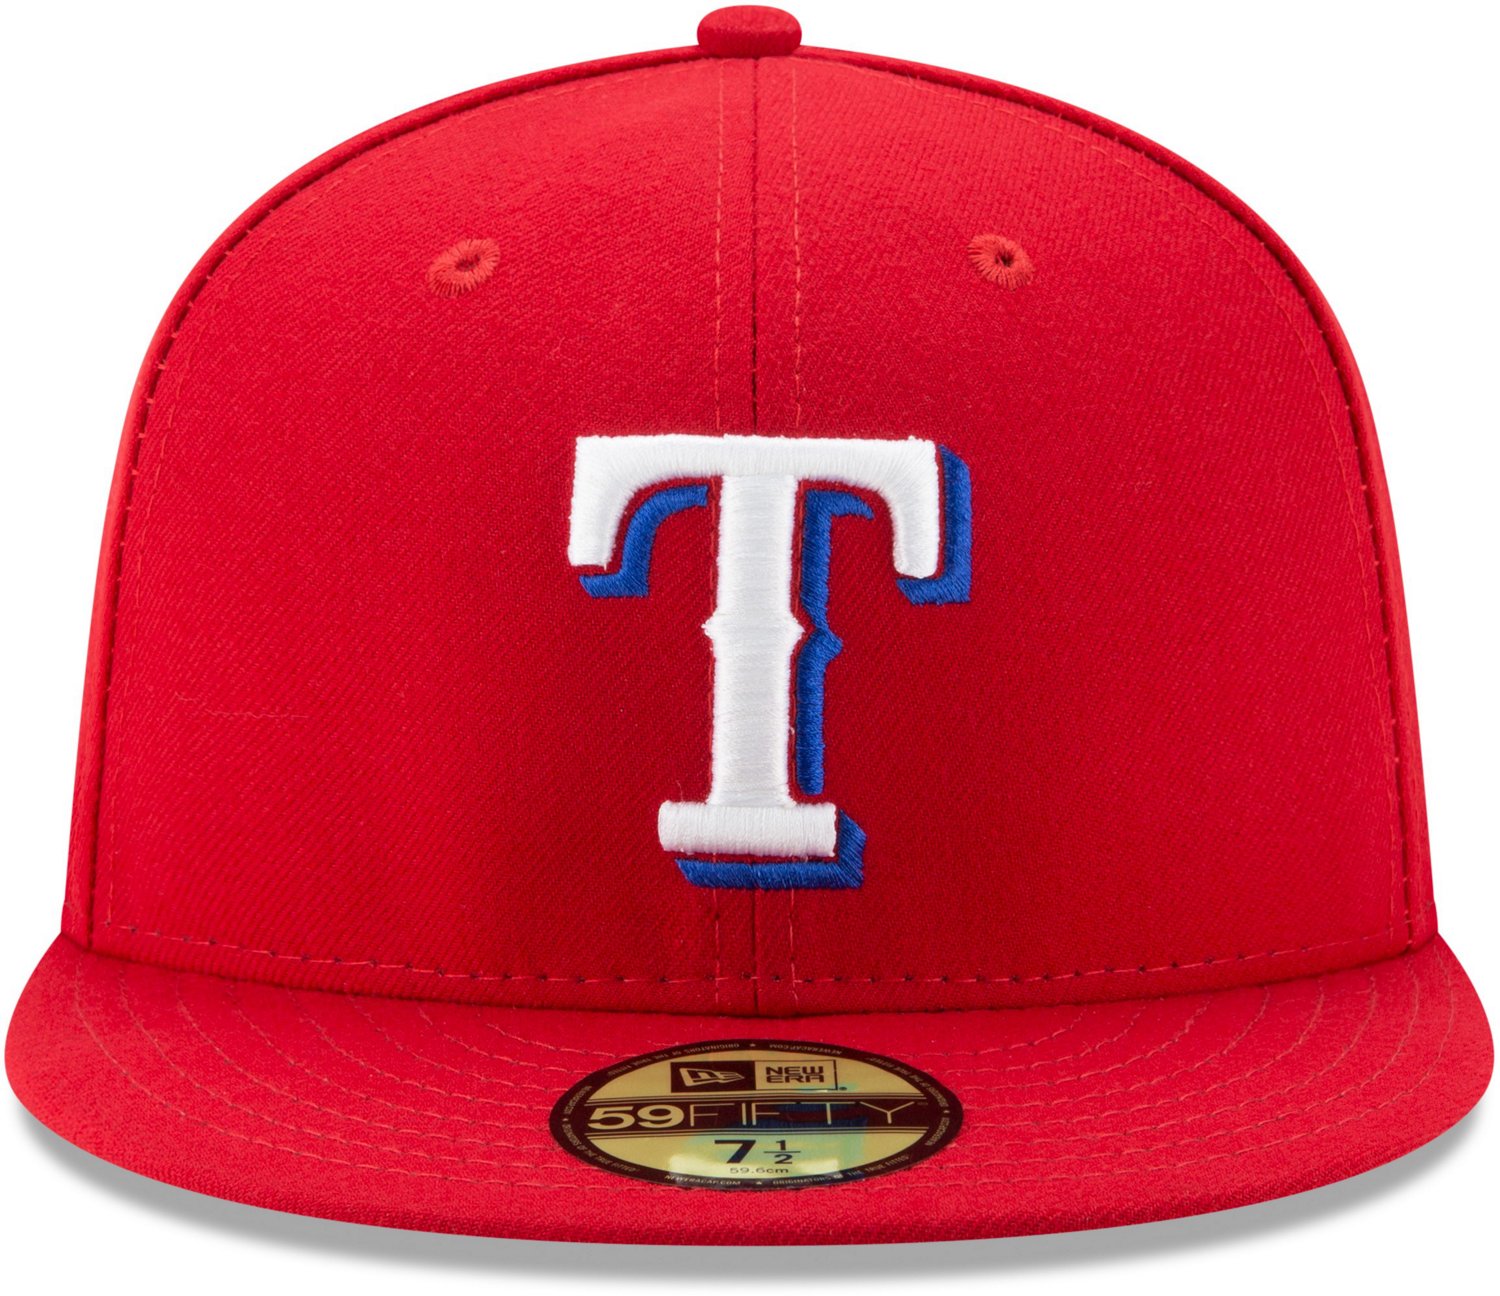 New Era Men's Texas Rangers Authentic Collection 59FIFTY Fitted Cap